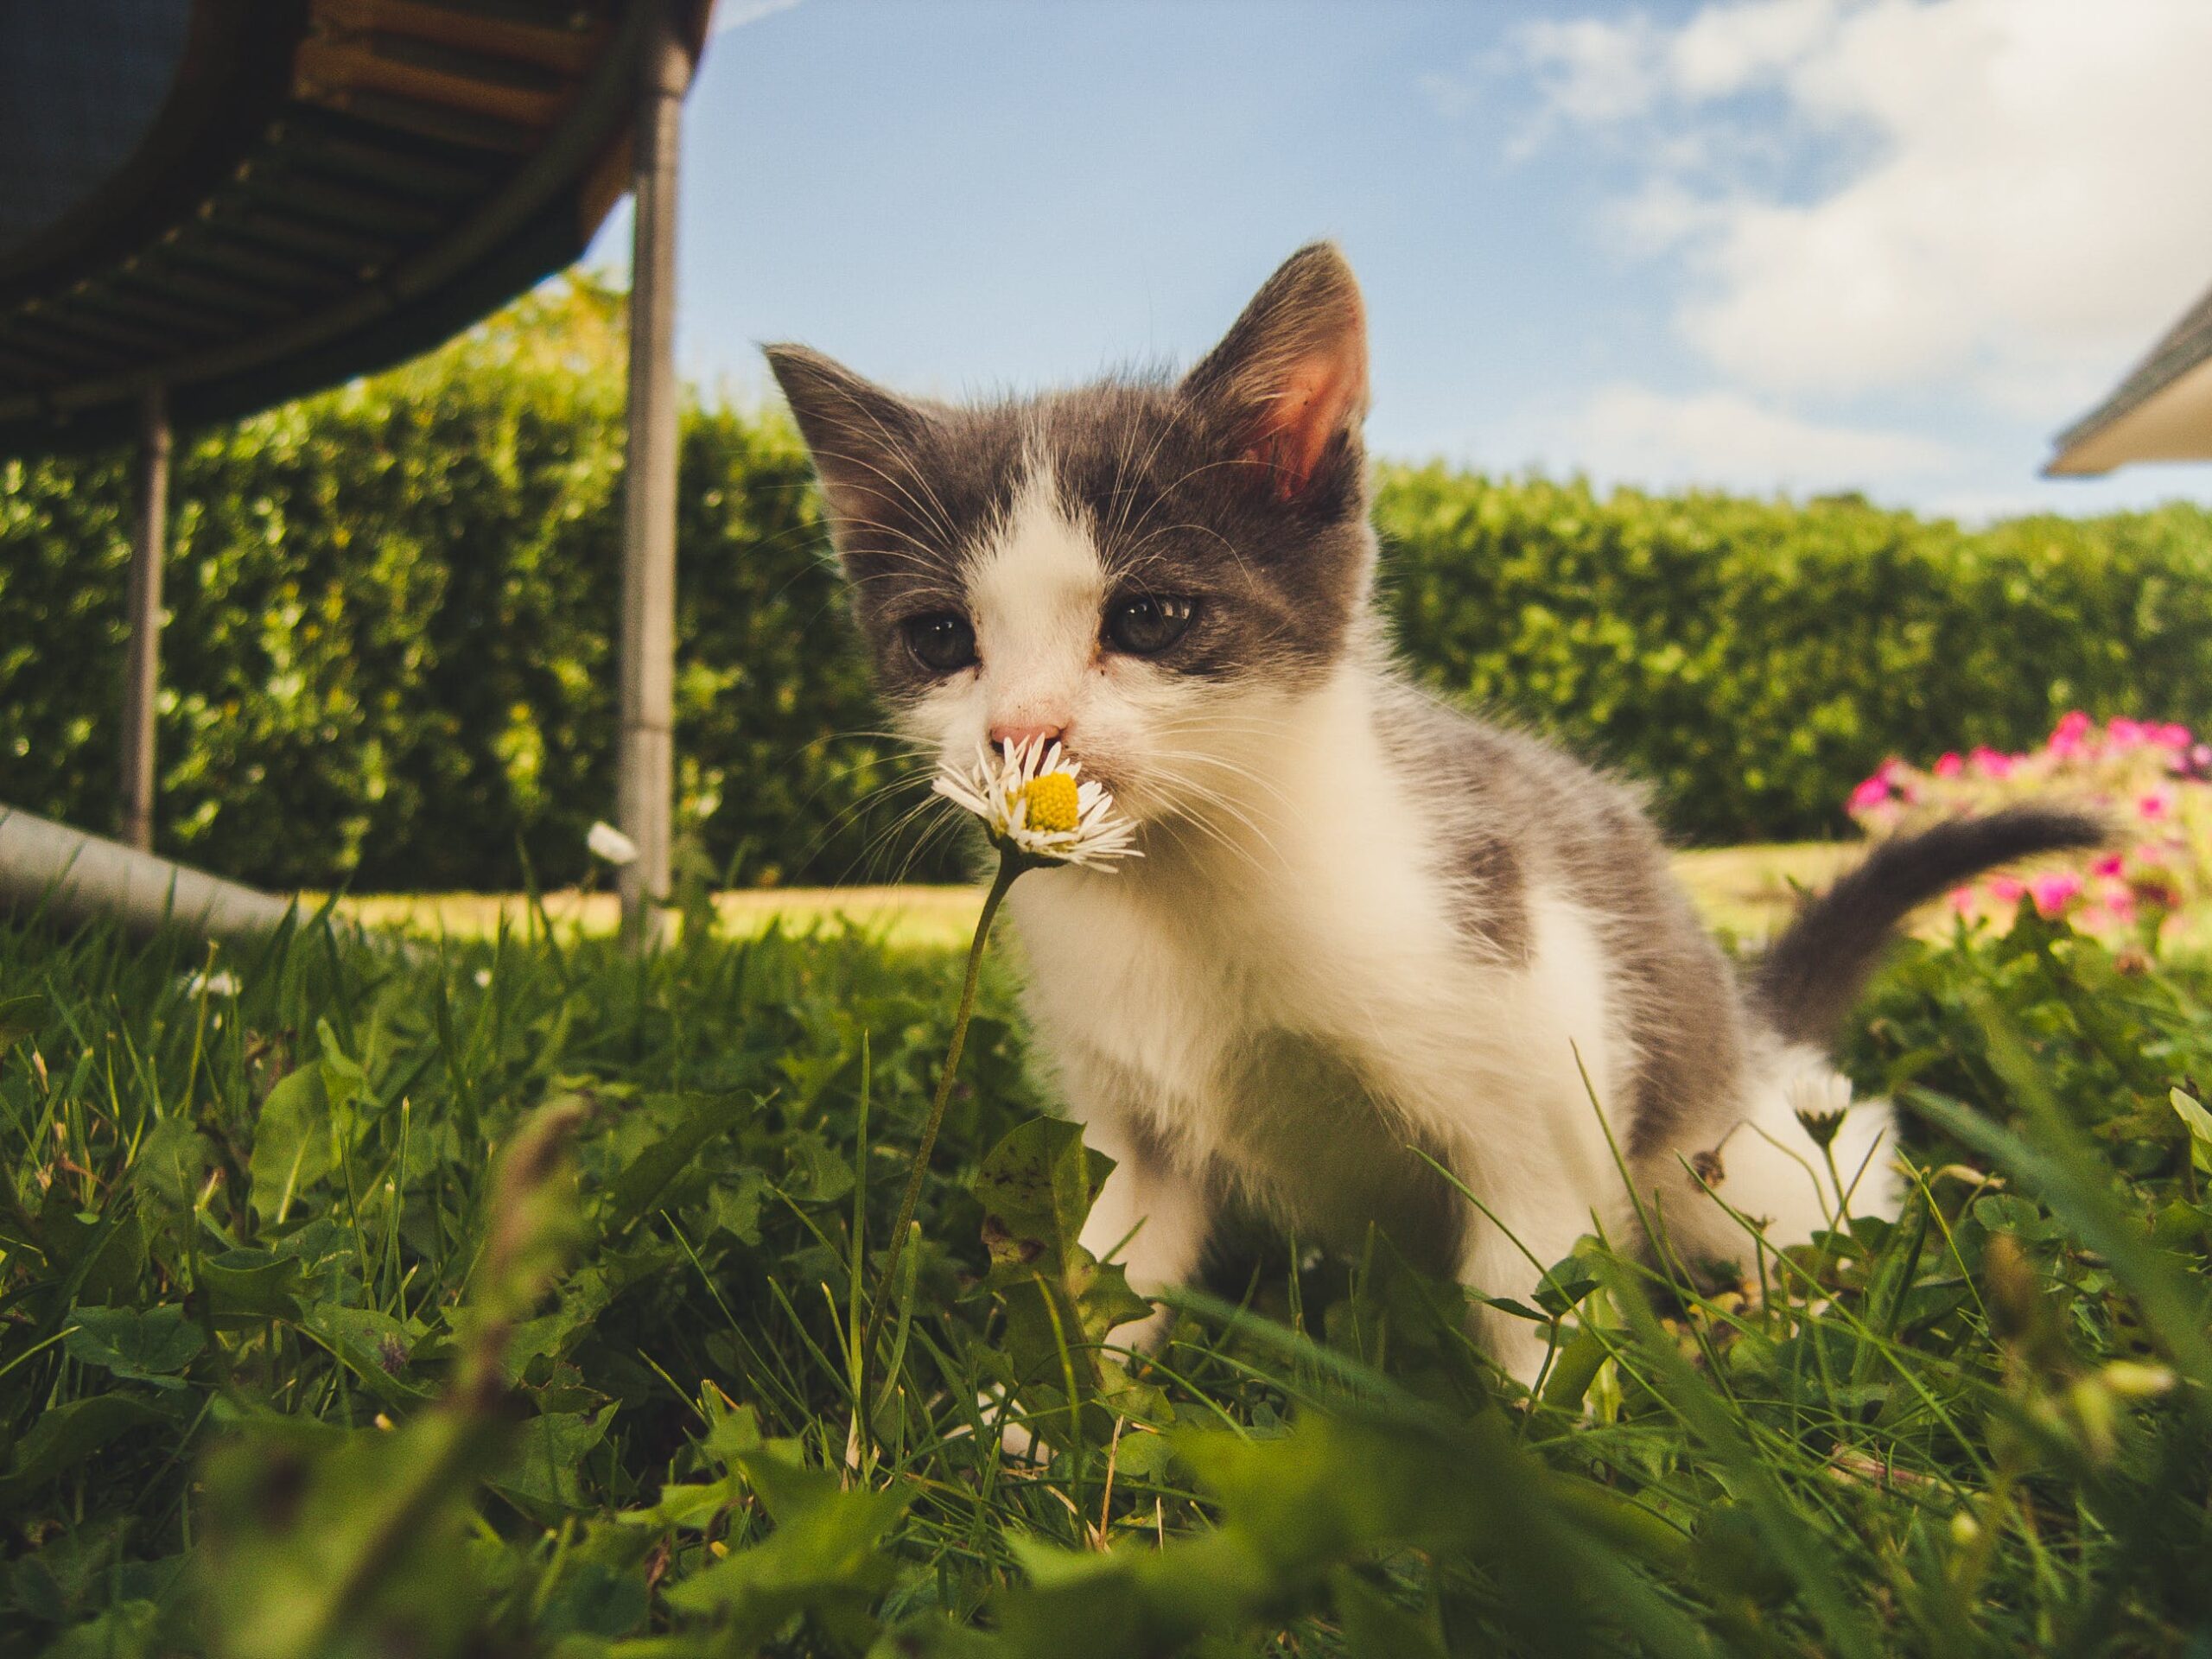 Curious cat exploring a plant, using its keen sense of smell to investigate the botanical wonders in its environment.